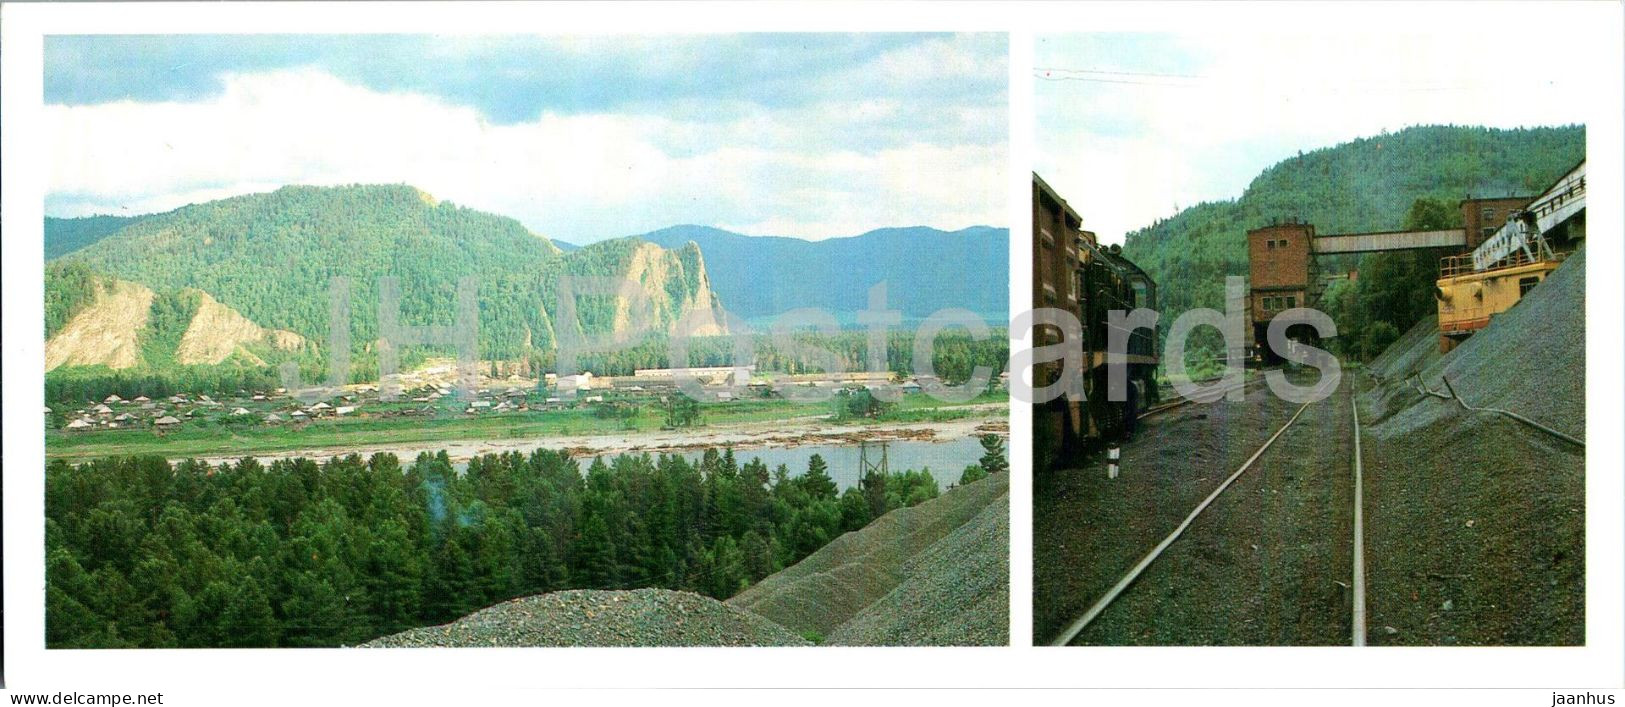 Abaza - View At The Town - Shipment Of Iron Ore Concentrate - Khakassia - 1986 - Russia USSR - Unused - Russie